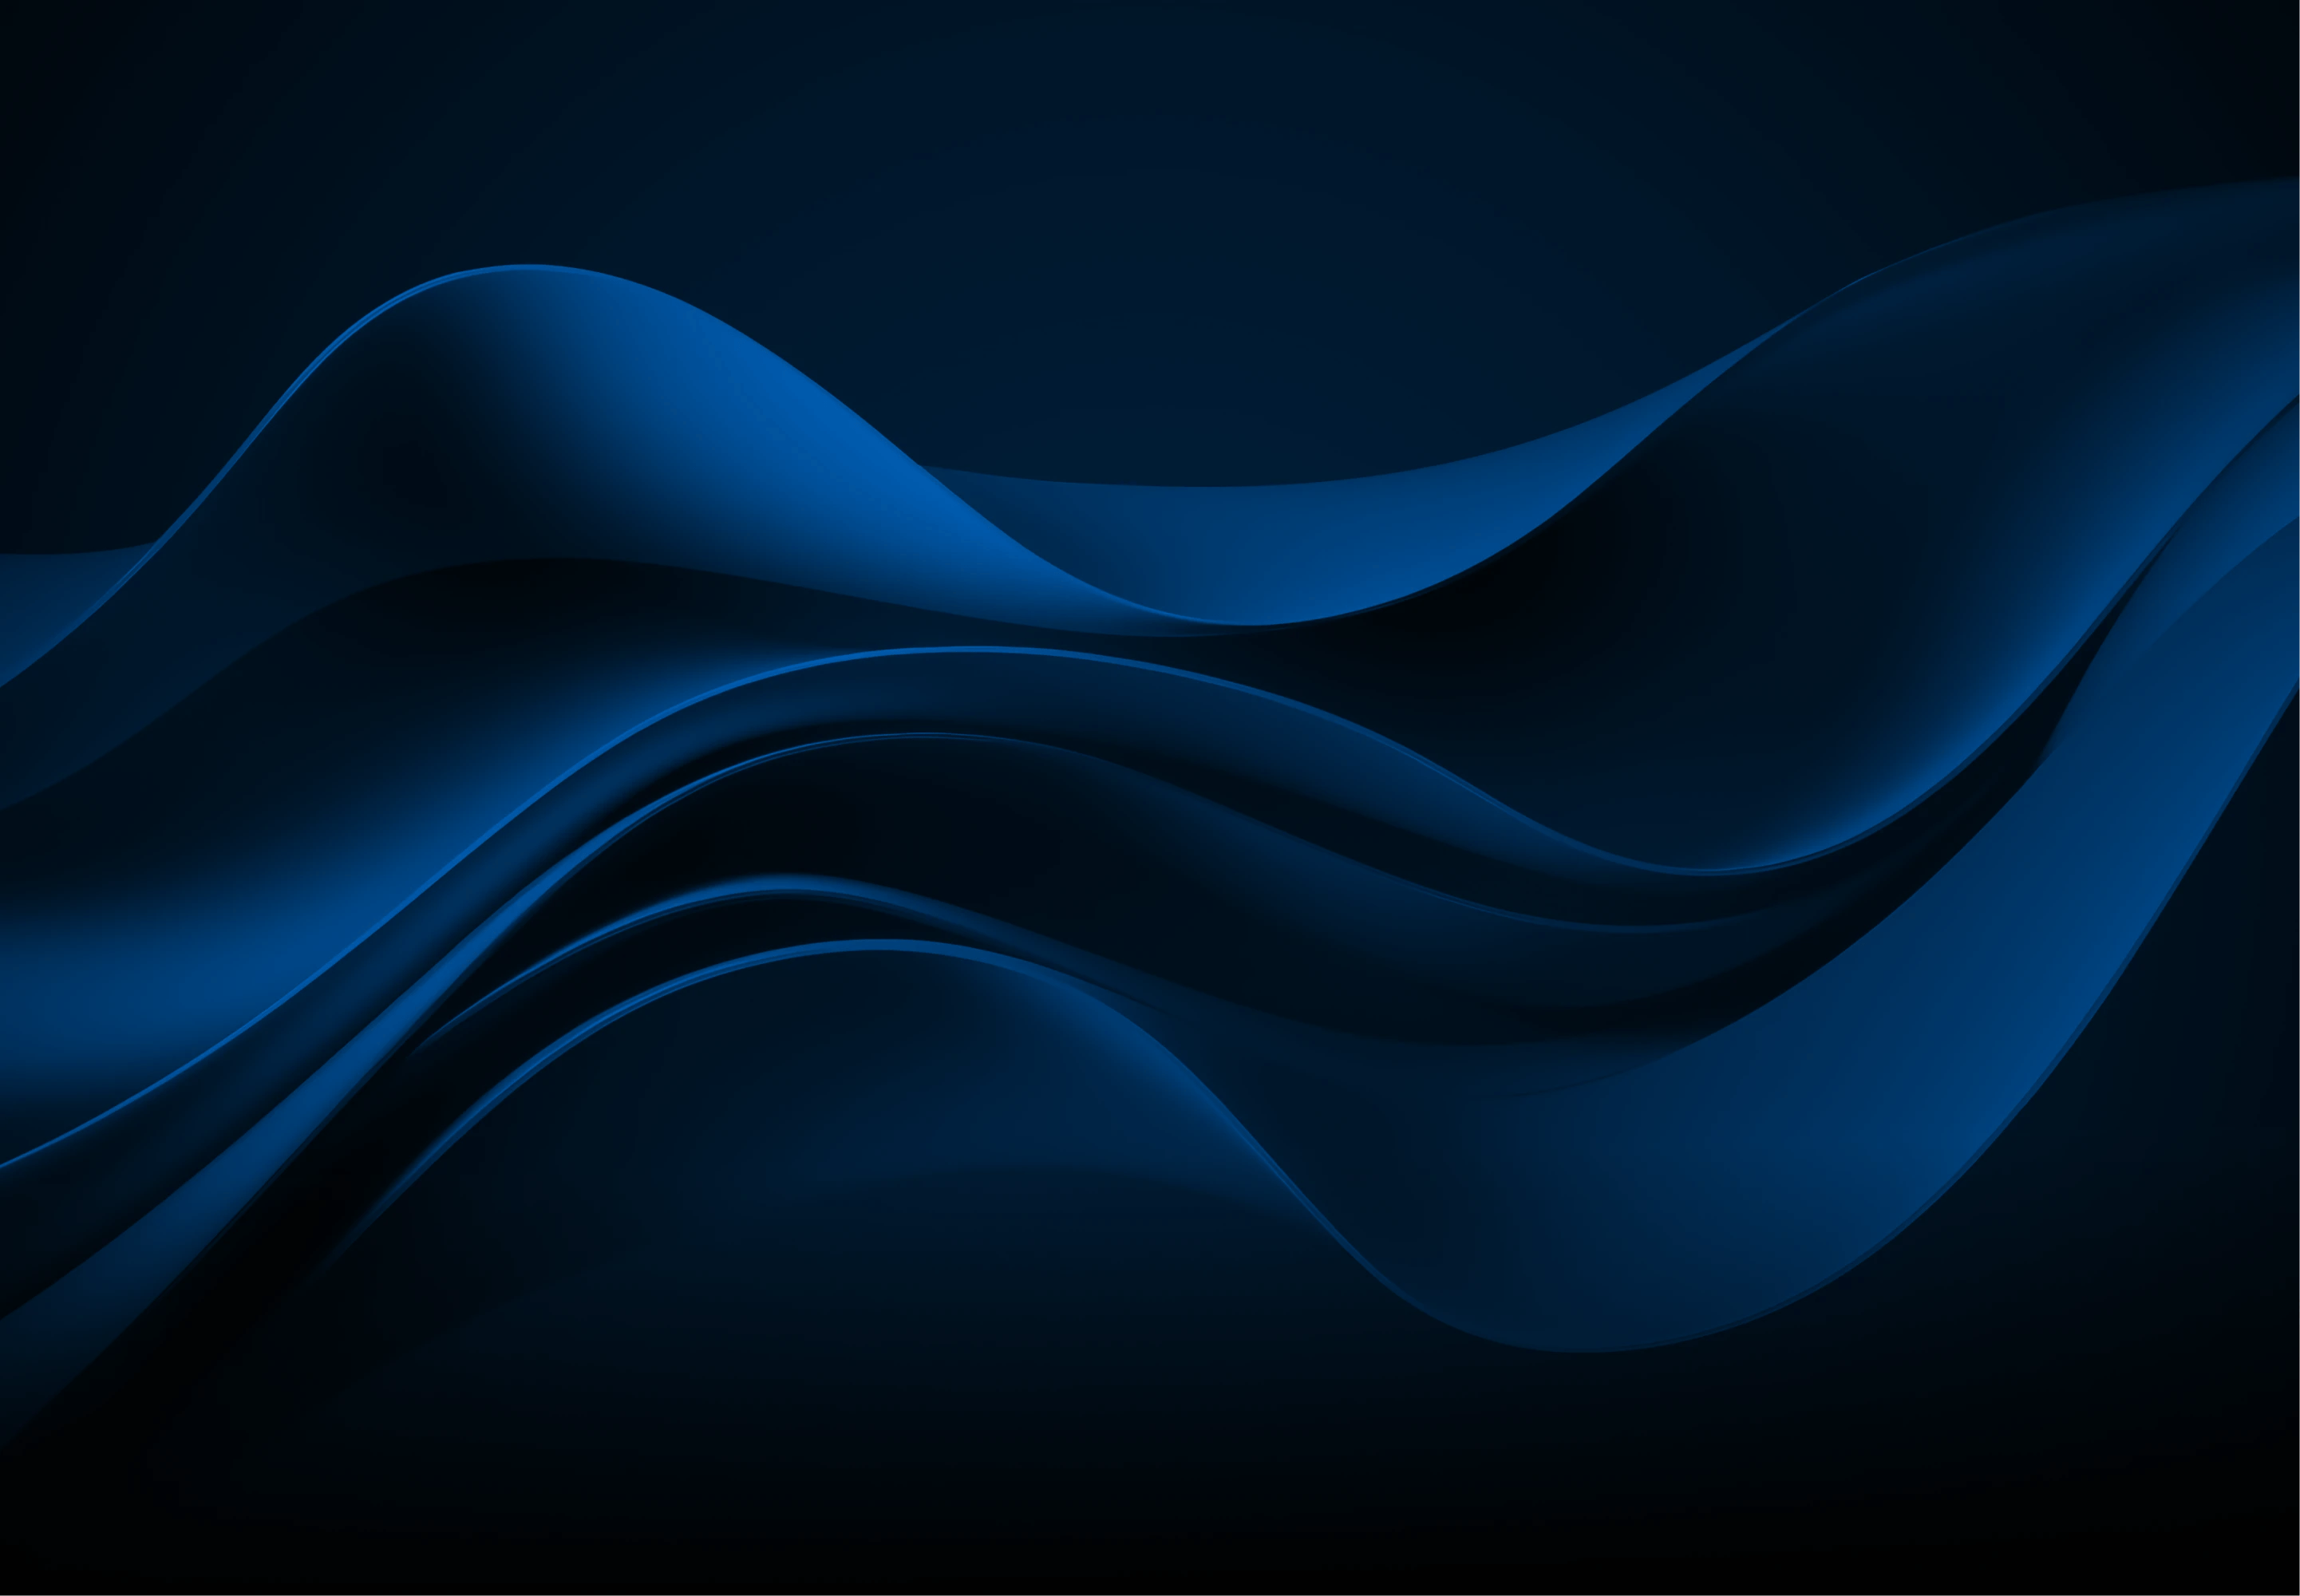 Decorative shapes background with blue glow